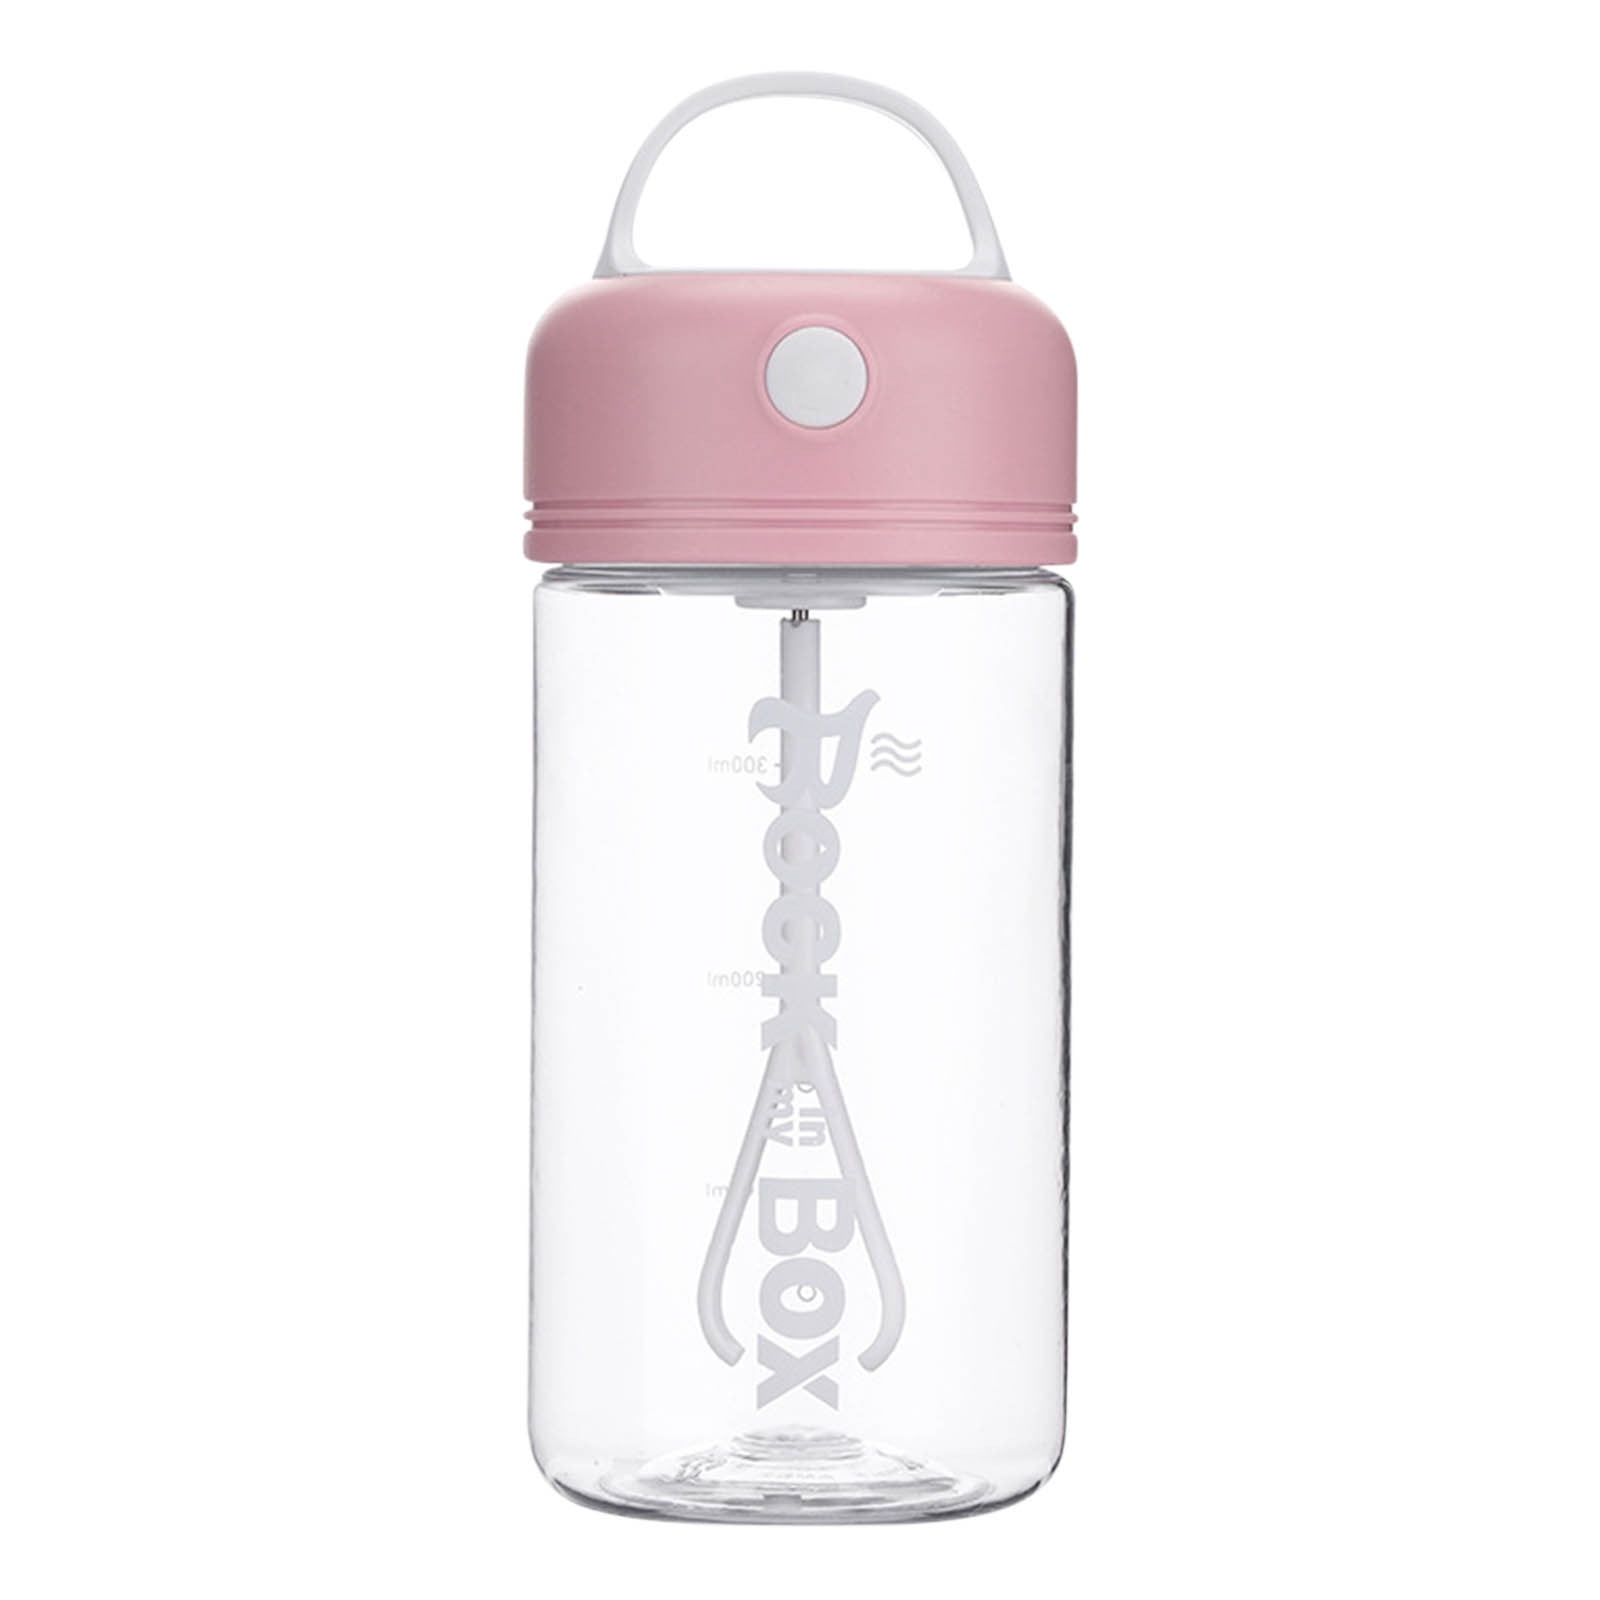 XTKS Shaker Bottle 18OZ Protein Shaker Bottles with Powder Storage & Pill  Case 500ML GYM Shaker Cup for Protein Mixes with Mixing Ball Leak Proof  Mixer Bottle for Pre Workout,BPA Free(white) 